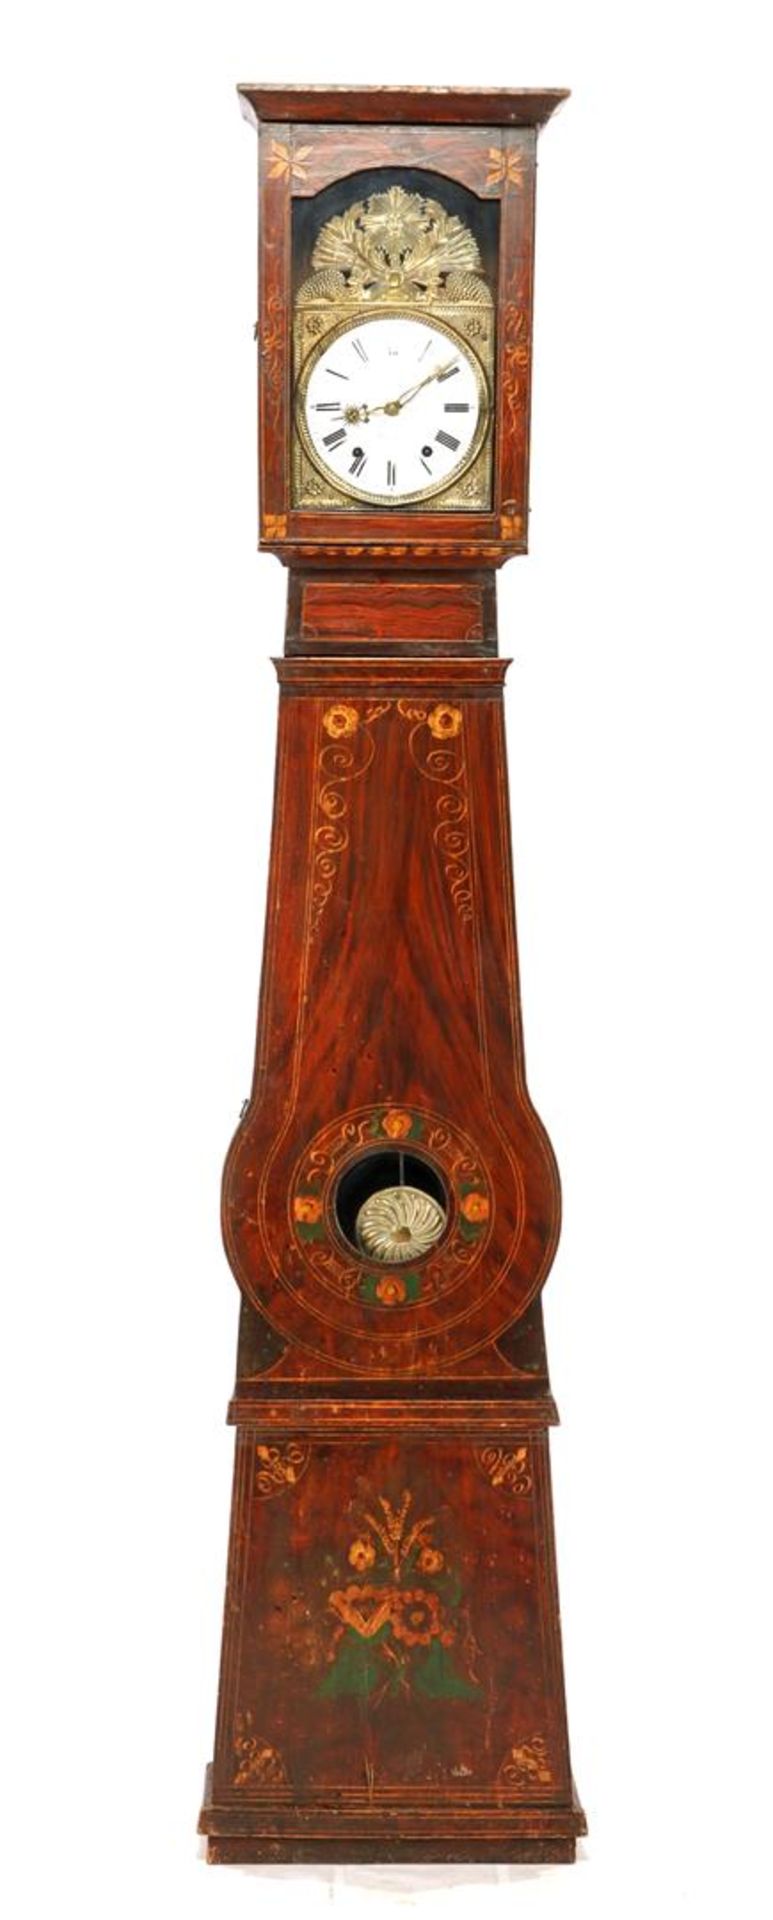 Antique comtoise clock in richly painted wooden case, address Lambert a Pejrehorade, verge